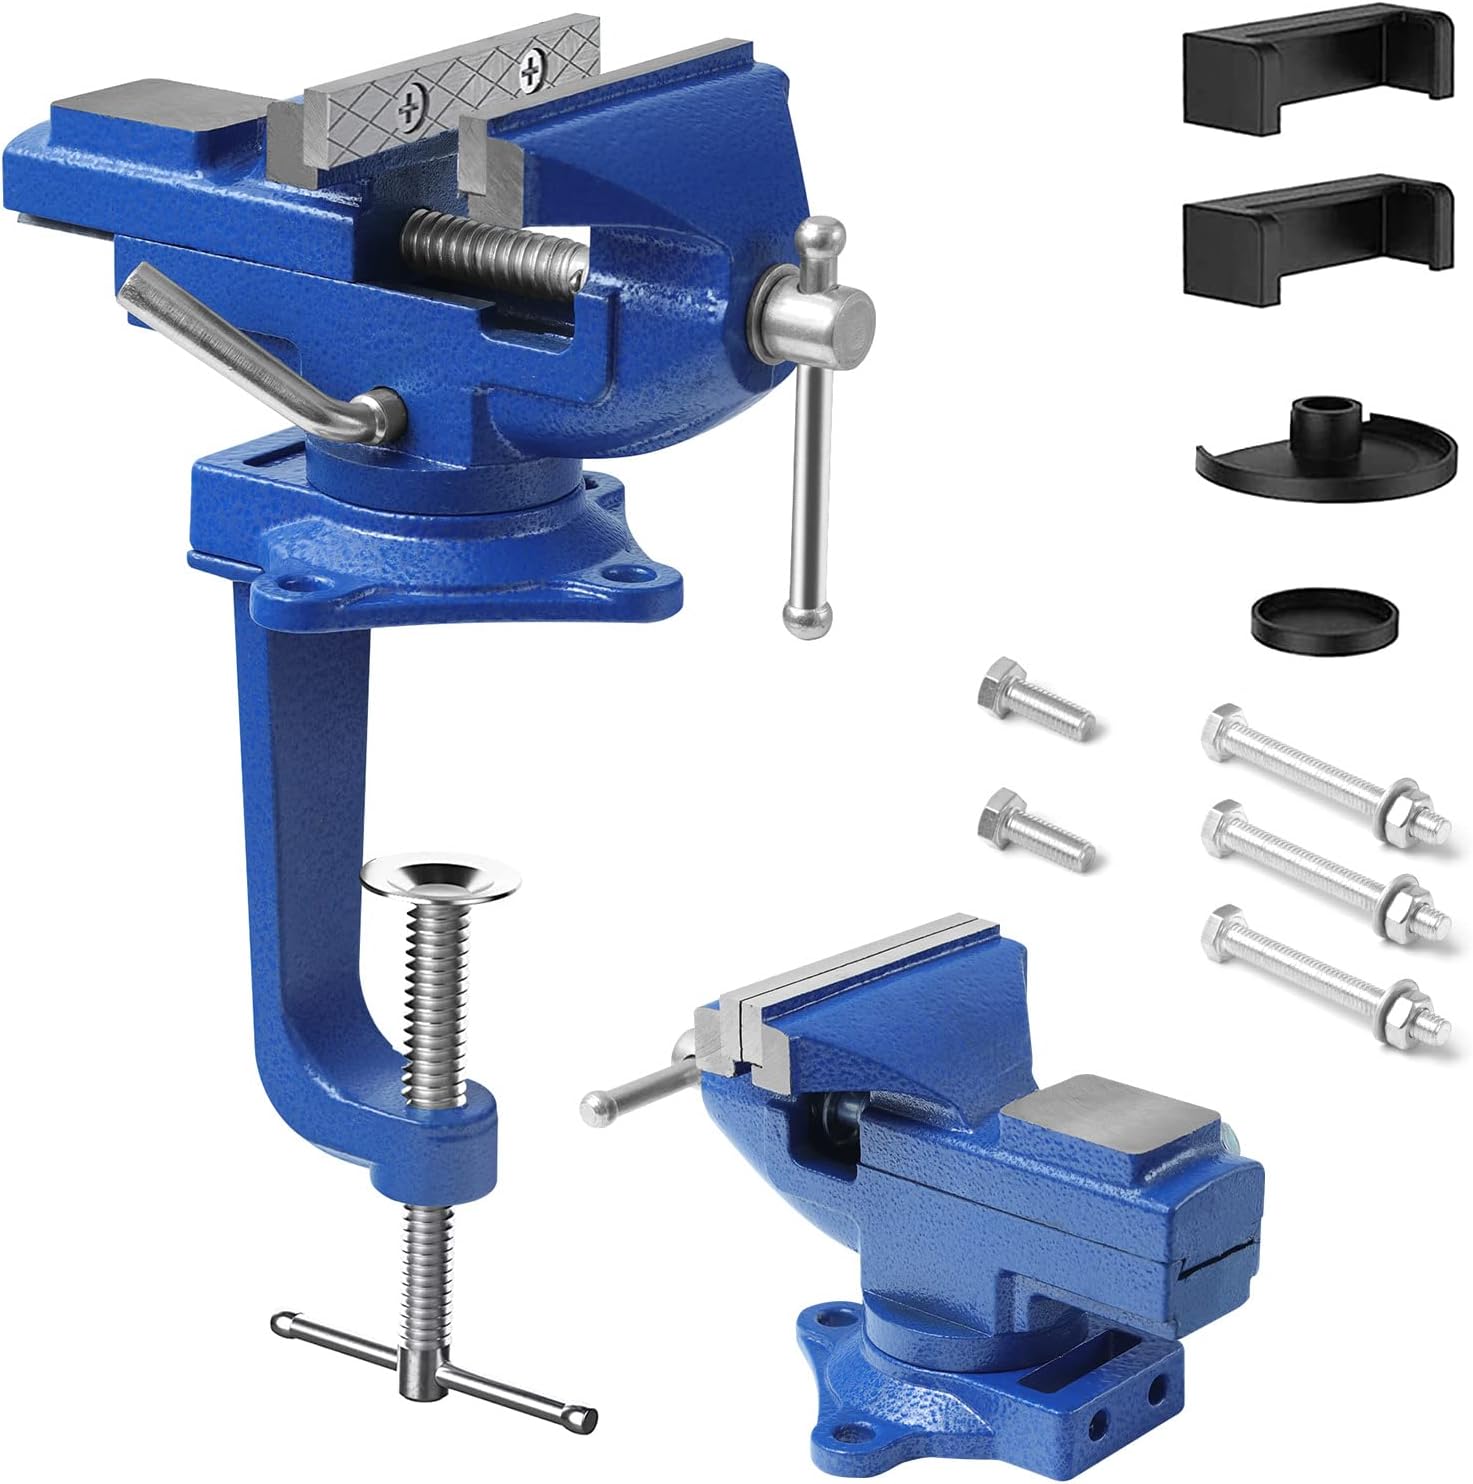 Heavy Duty Table Vise Review